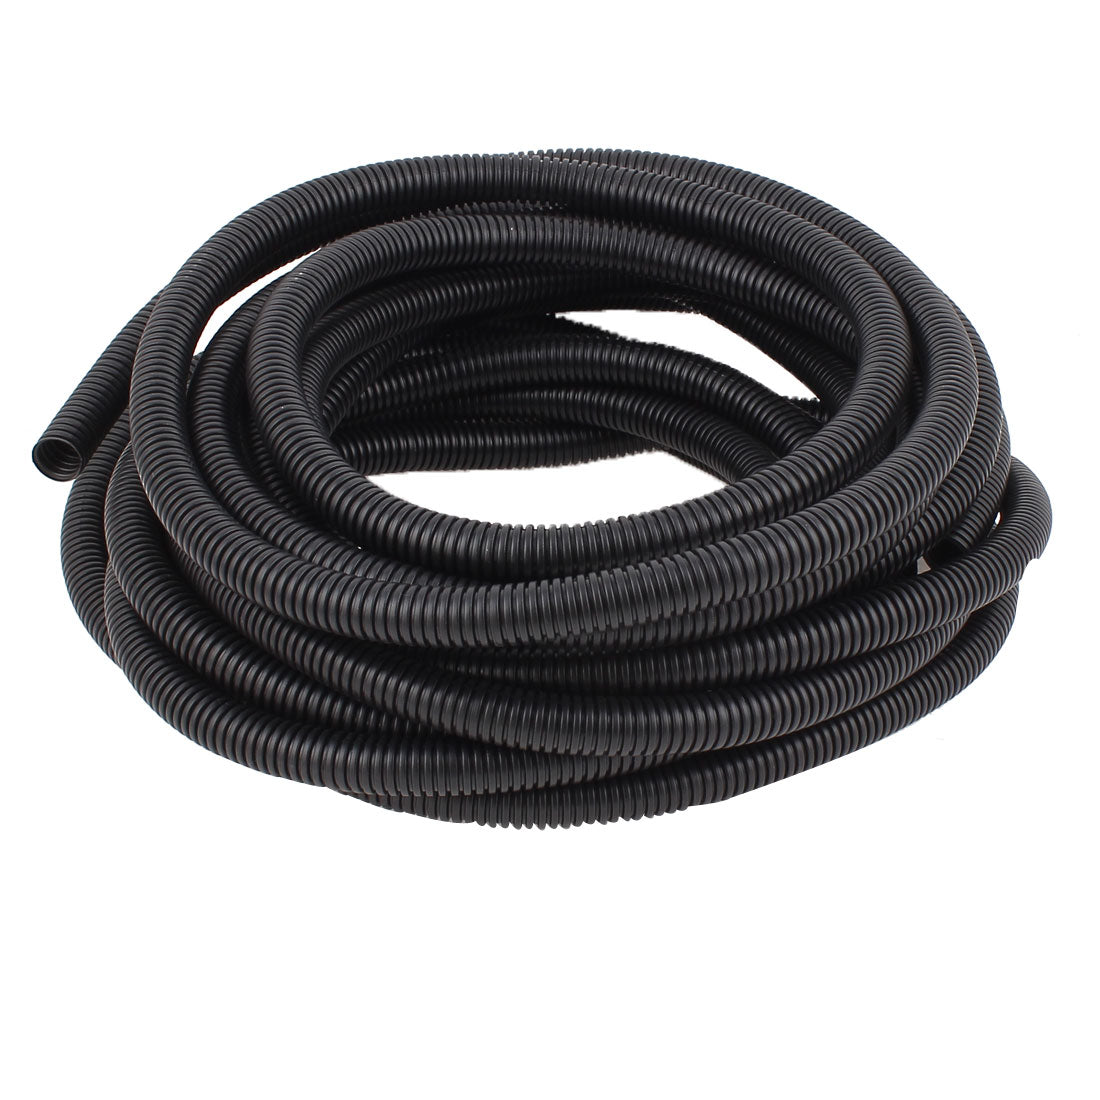 uxcell Uxcell 10 M 13 x 16 mm Plastic Flexible Corrugated Conduit Tube for Garden,Office Black